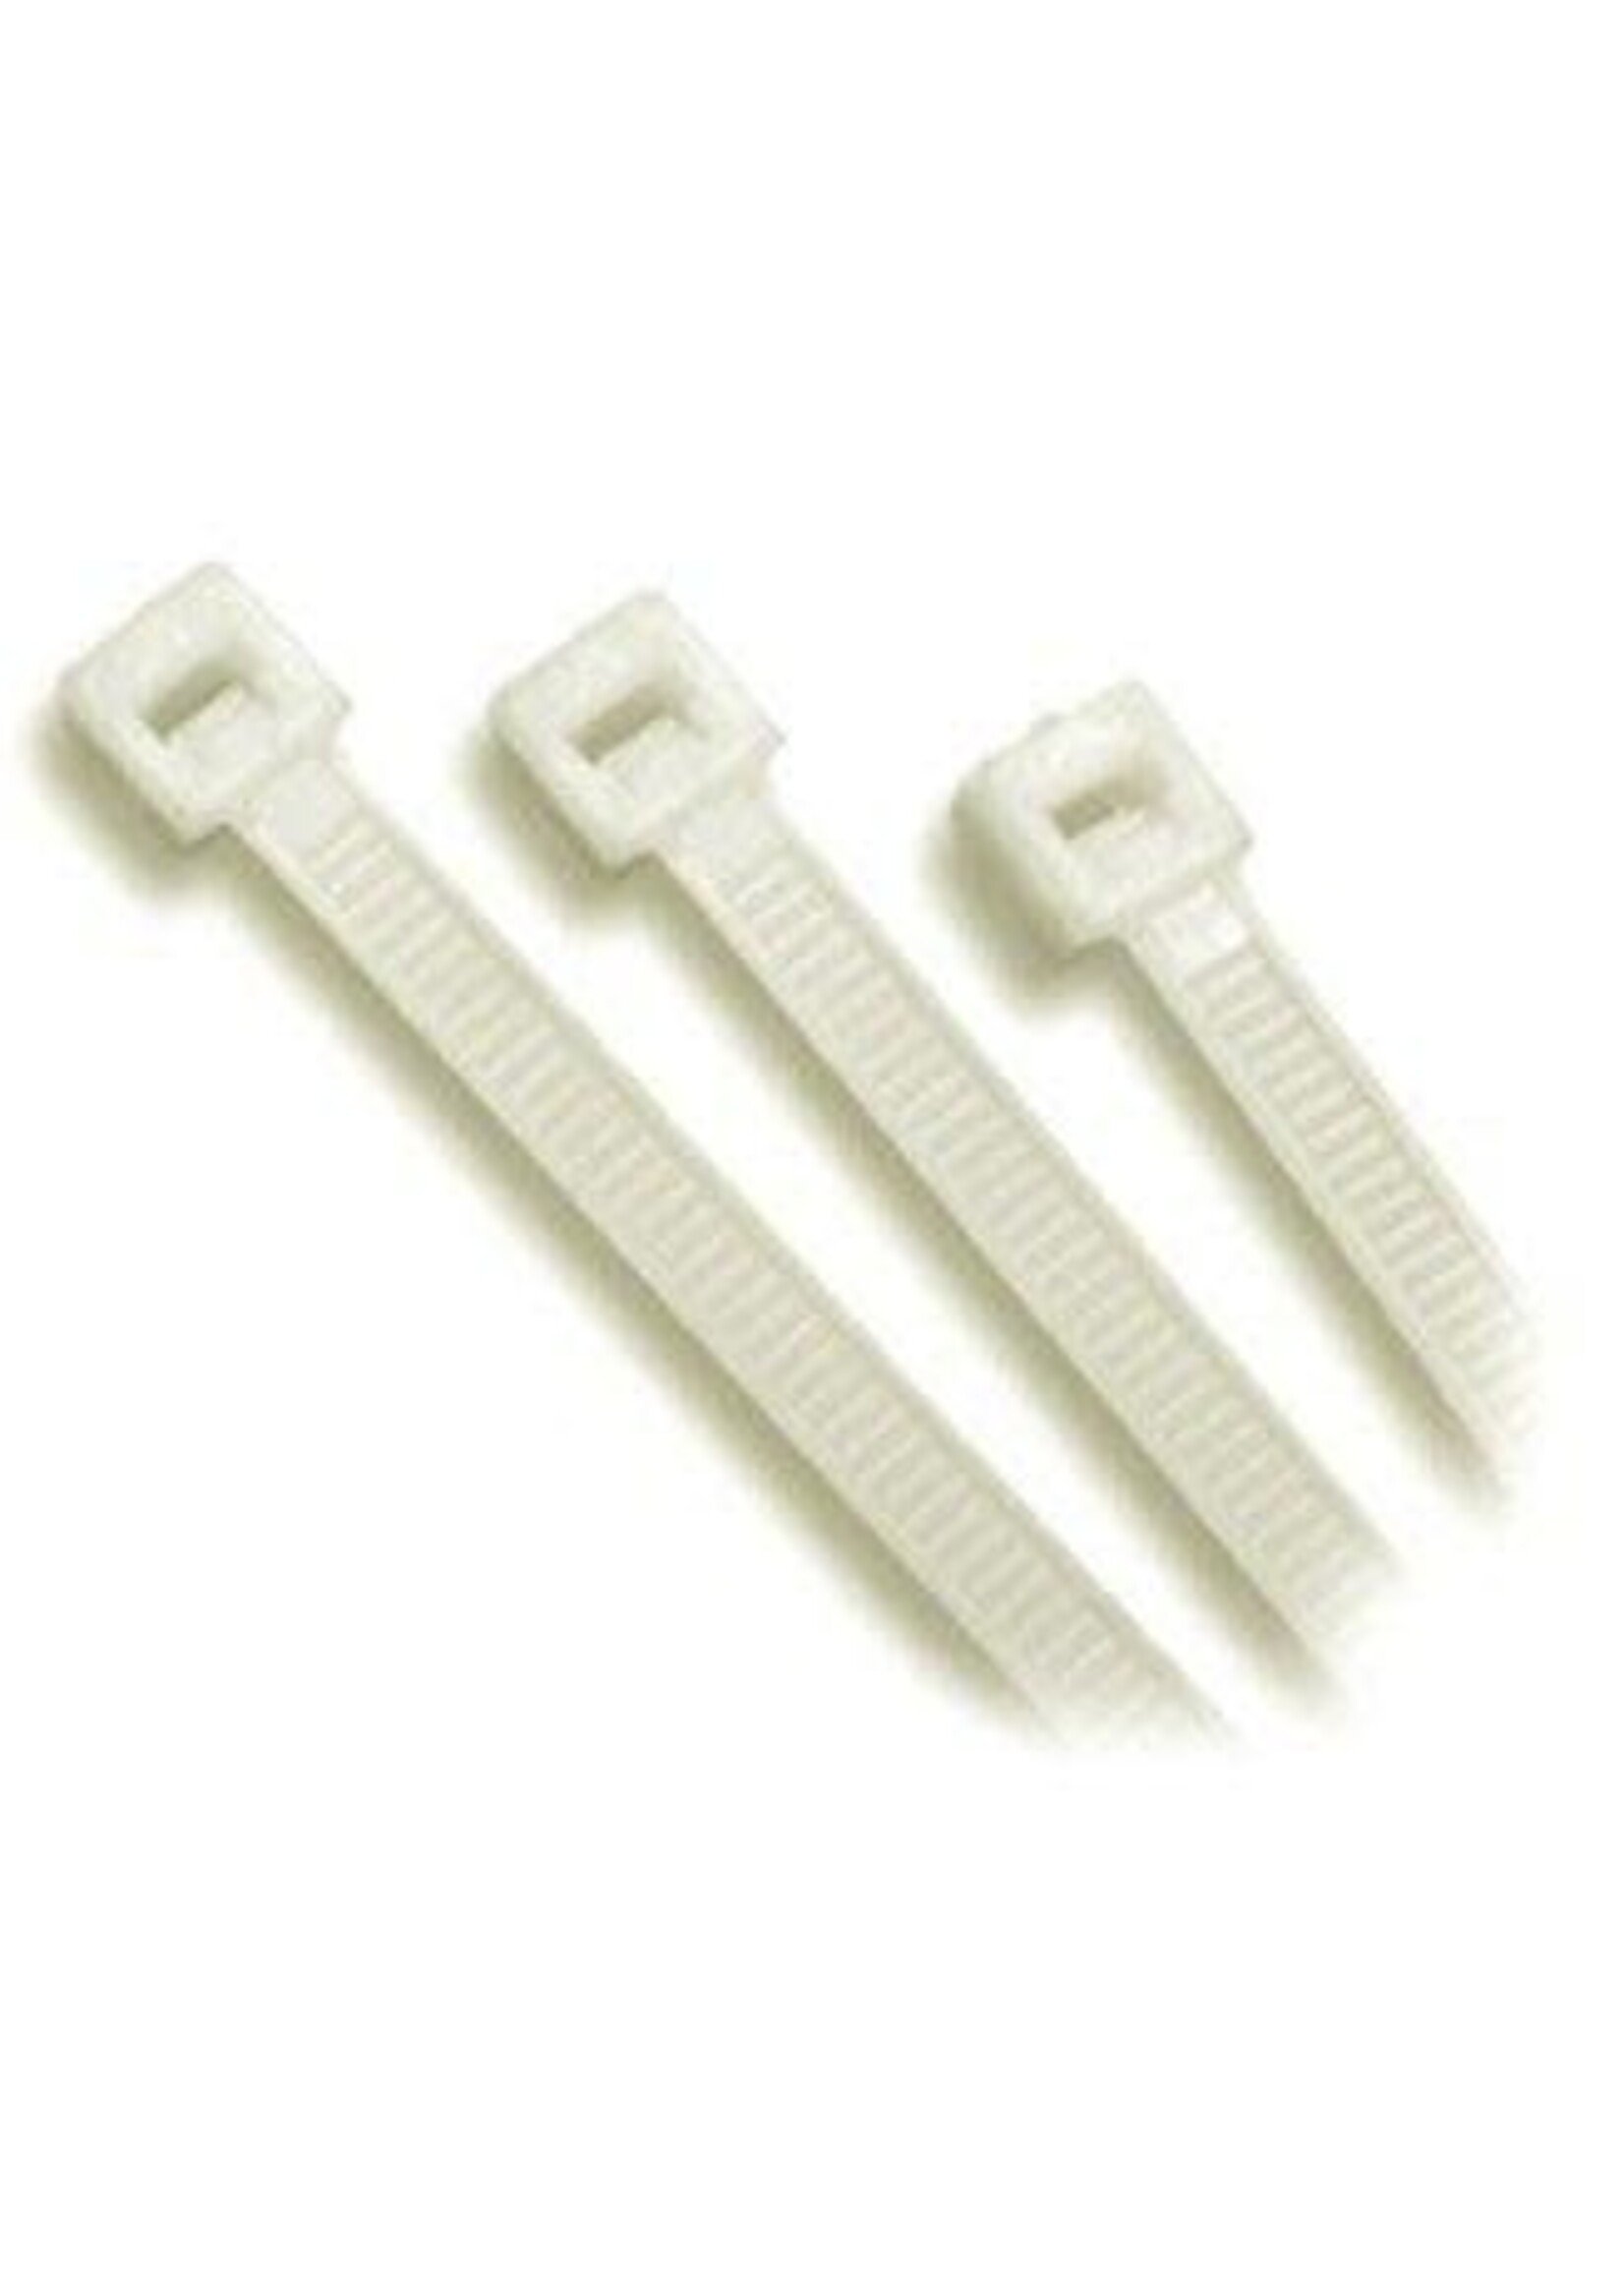 3M CABLE TIES 11" BLANCO (PAQUETE 100)